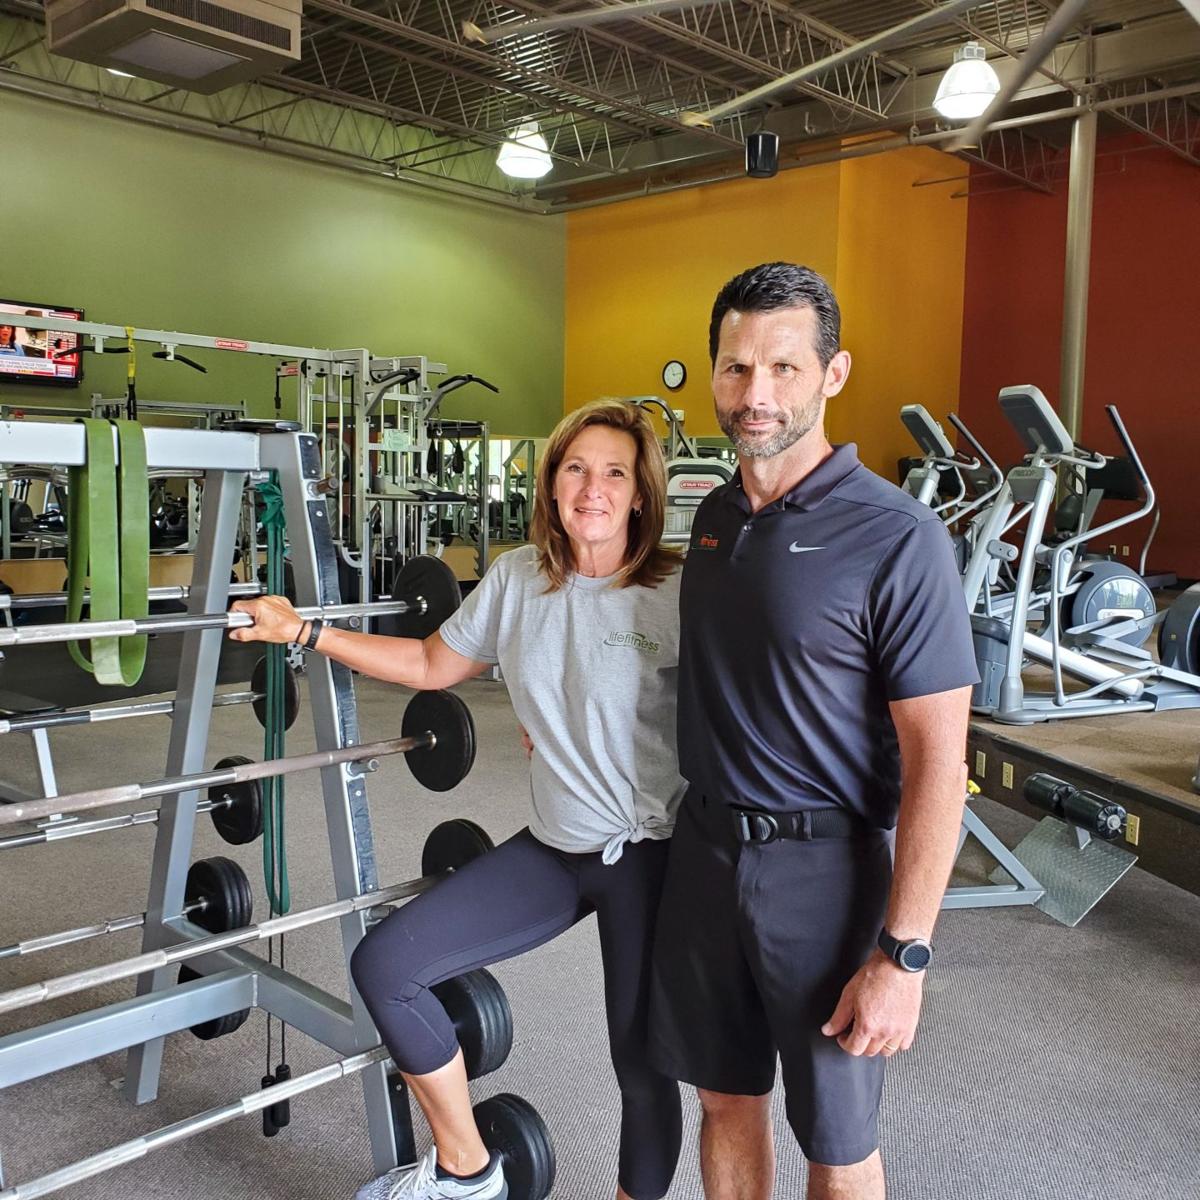 Life Fitness Management in LaVale begins new chapter, Business